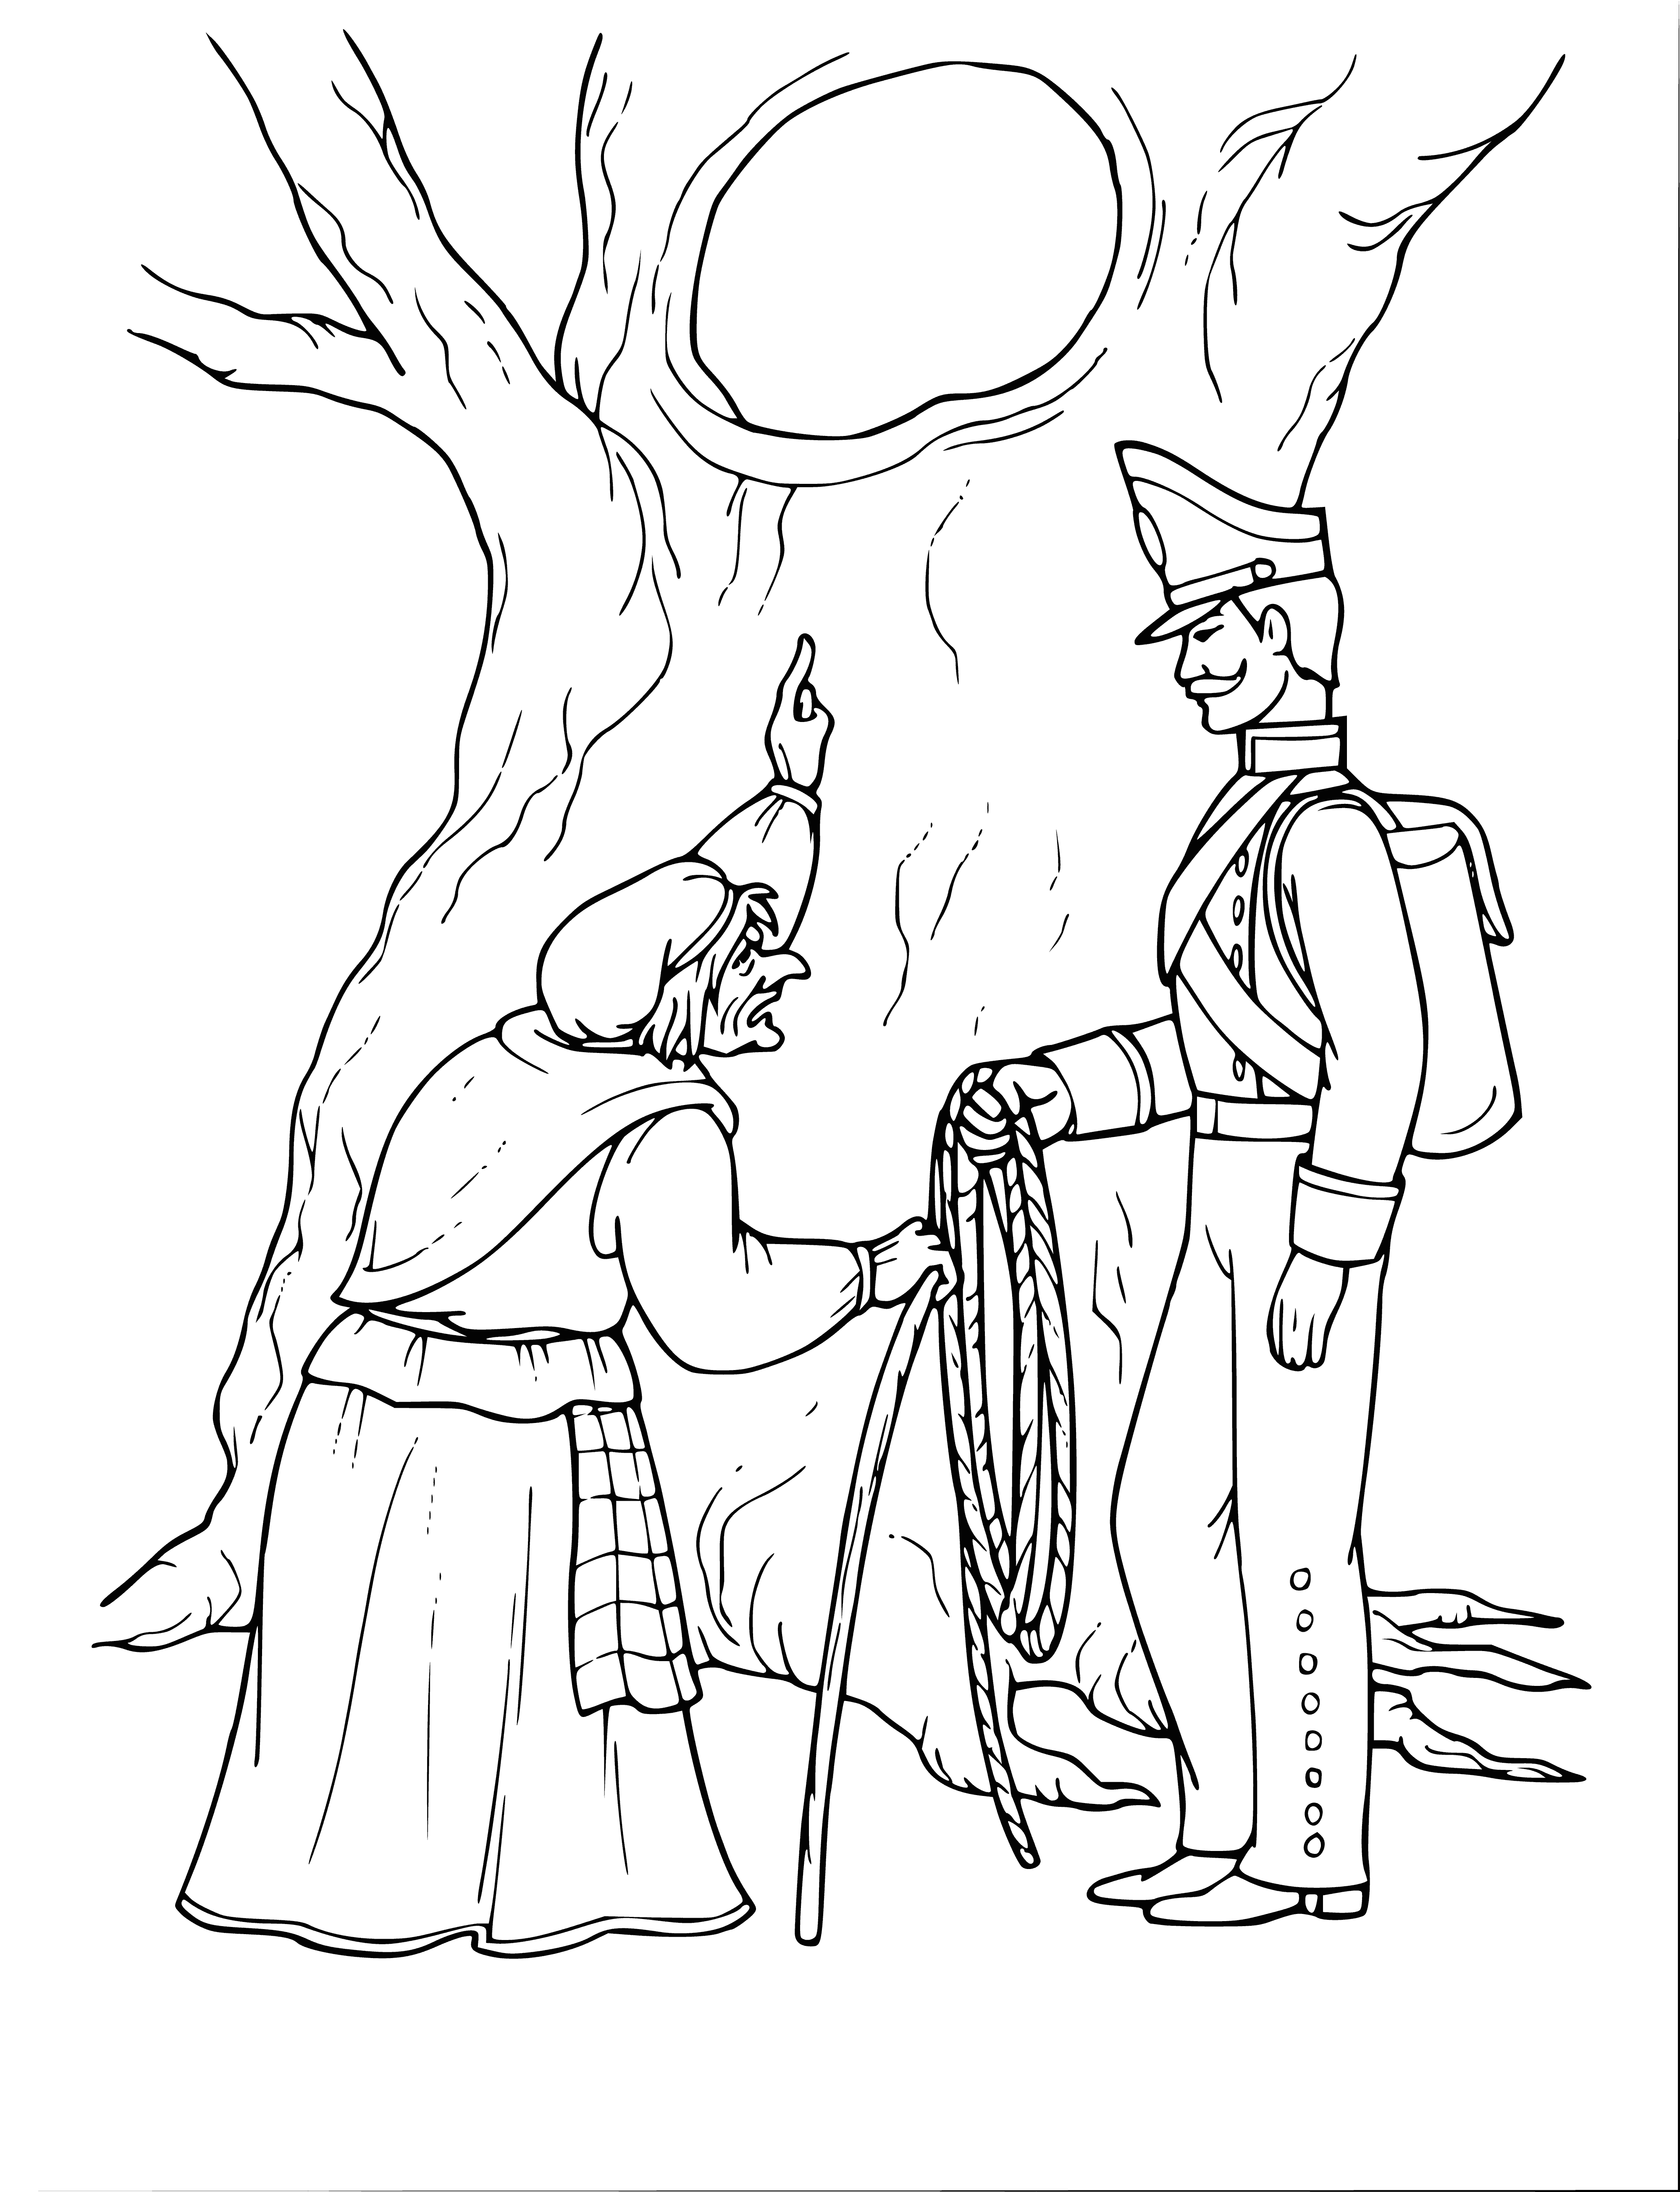 coloring page: Soldier confronts witch who has transformed his love into a wooden statue; courageously demands she change her back; but when he tries to kiss her, she turns into a thorny bush.